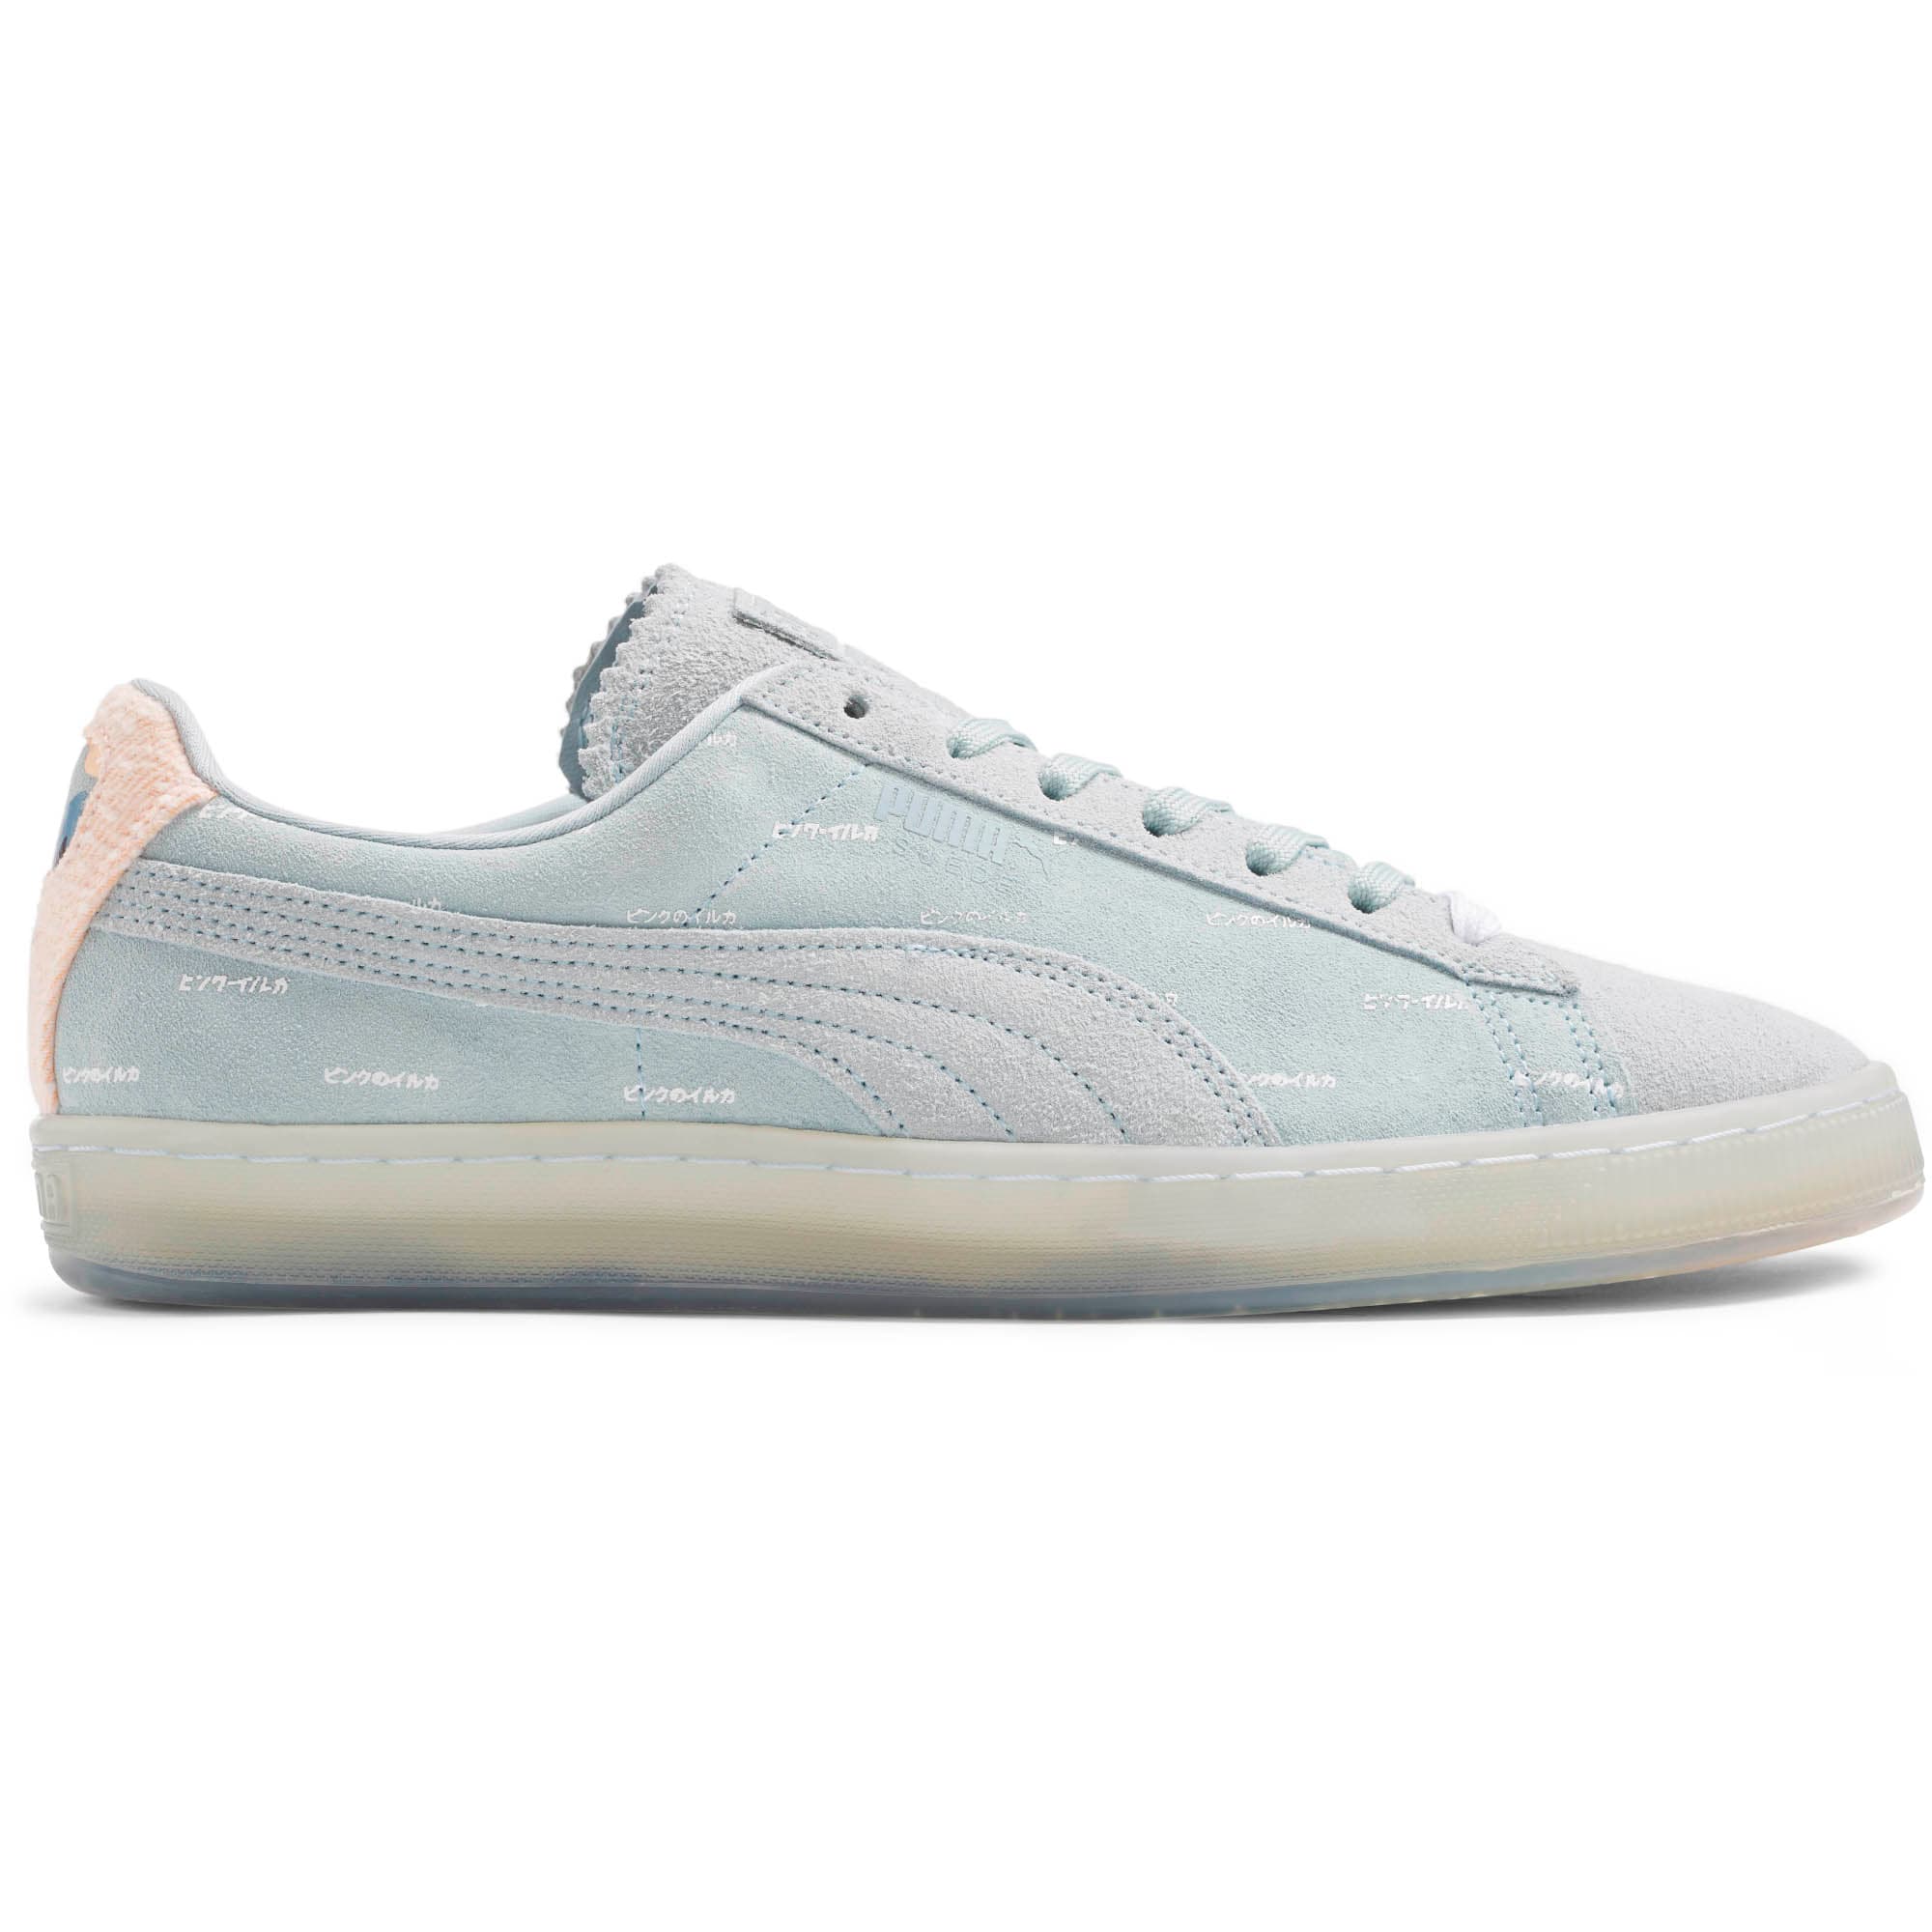 puma pink dolphin shoes